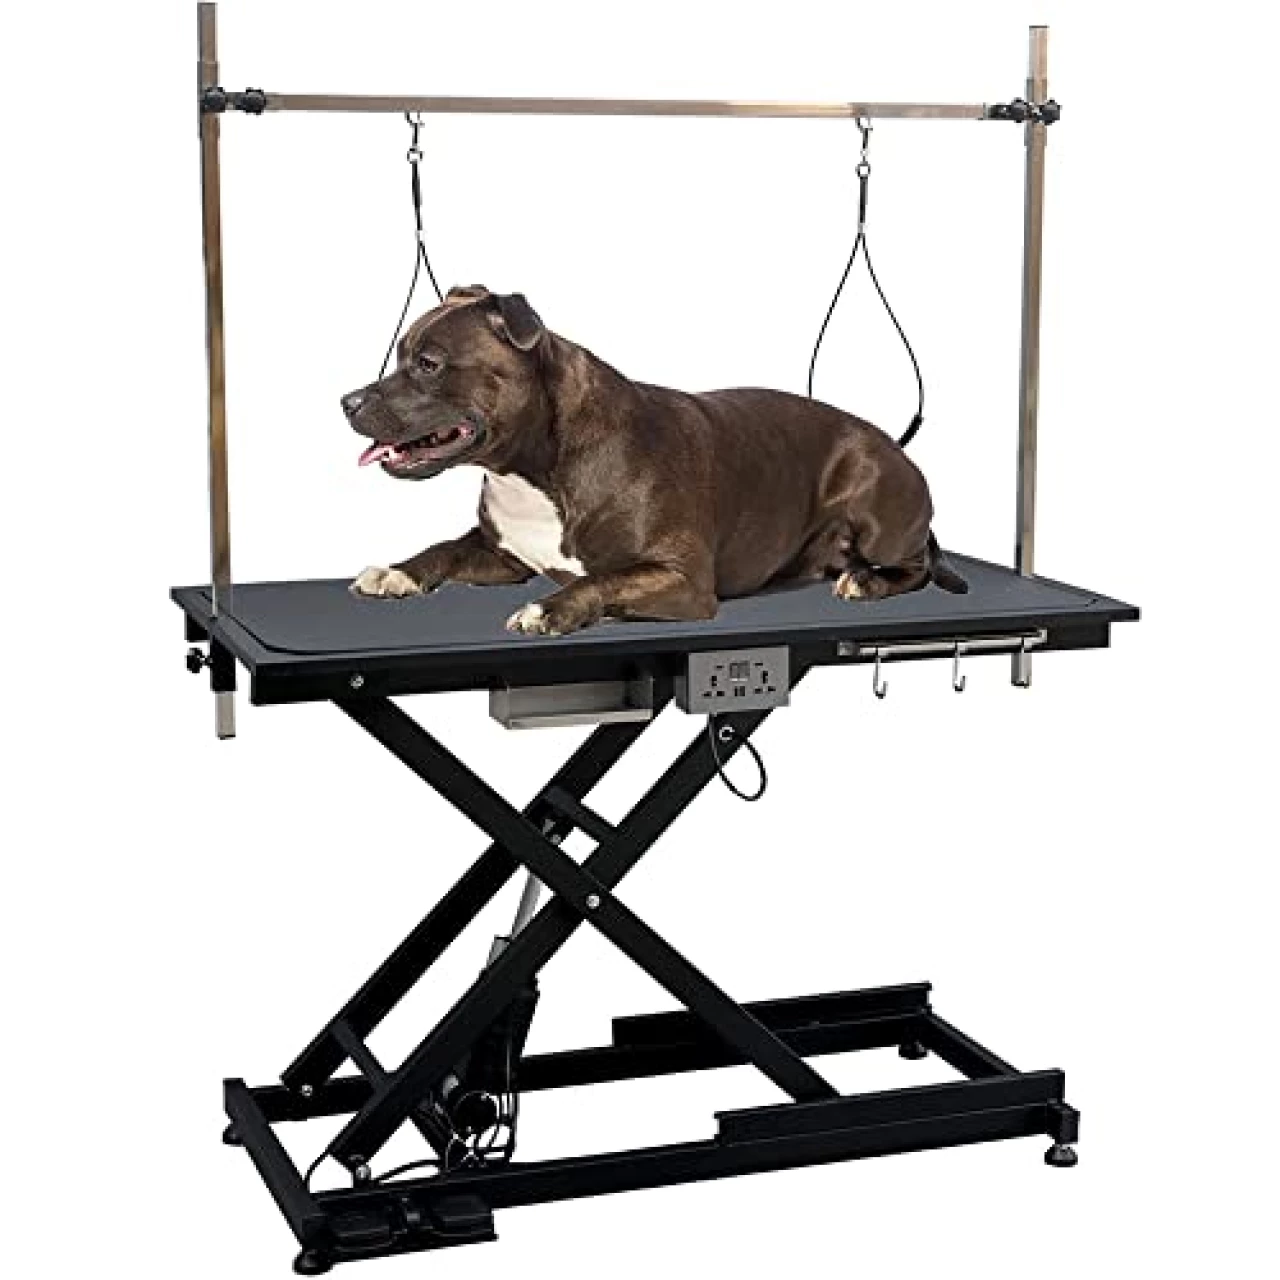 mydearpet Electric Dog Pet Grooming Table for Large Dogs, Heavy Duty X Lift Pet Grooming Table, Height Adjustable with Double Arms and Non-Slip Rubber Tabletop, 50&rsquo;&rsquo;/Black